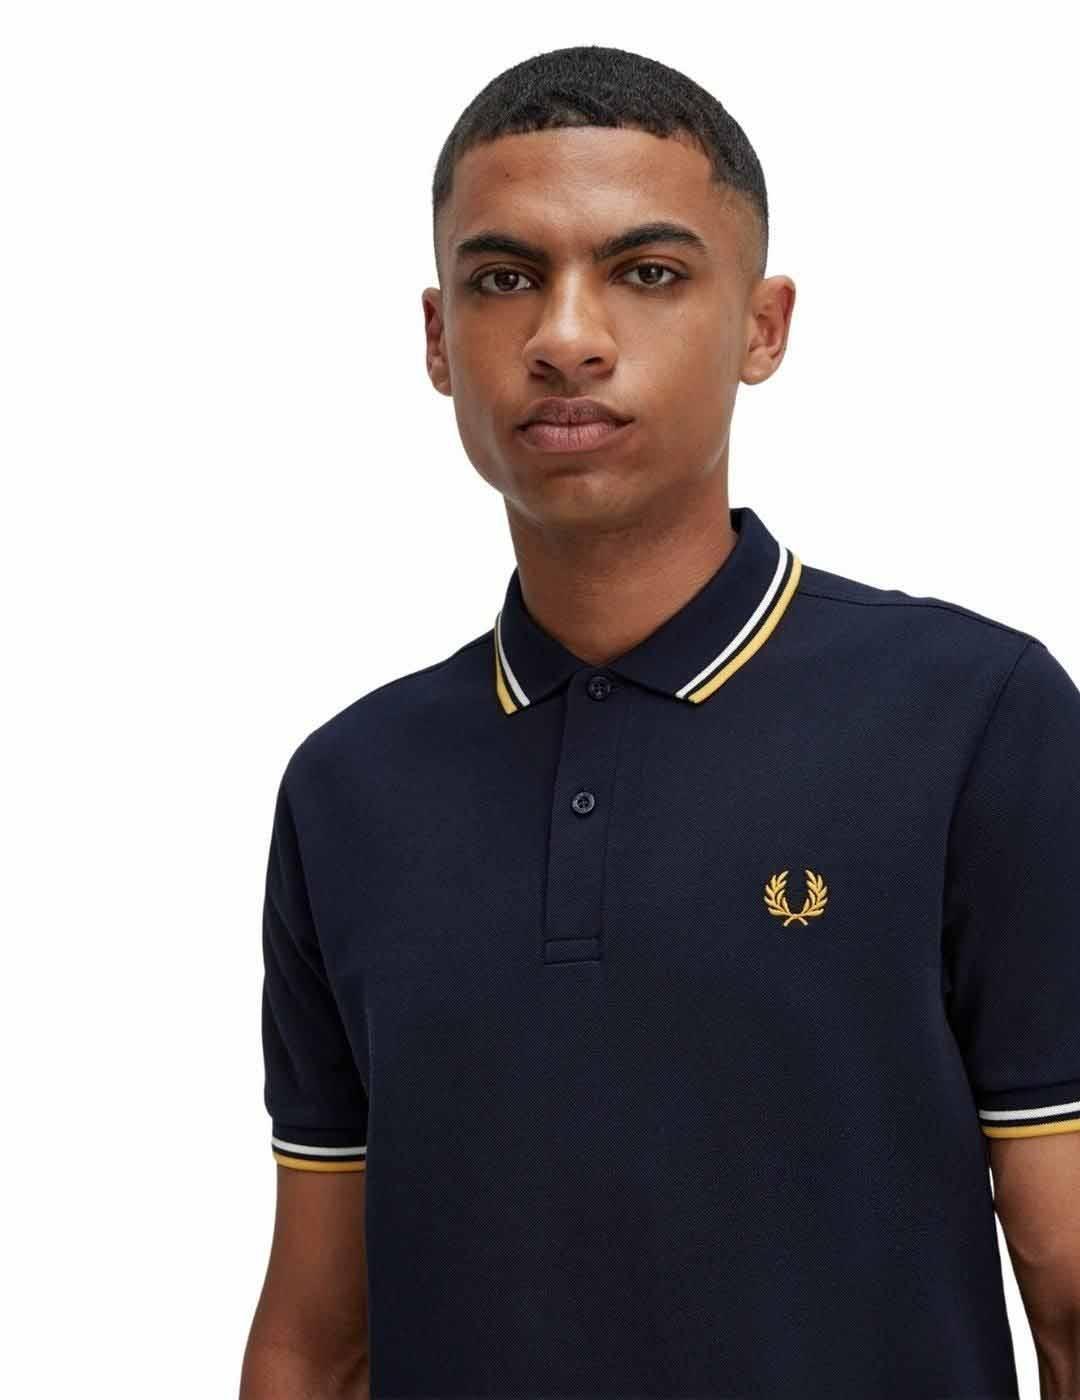 Twin Tipped M3600 Polo Fred Perry Para Hombre